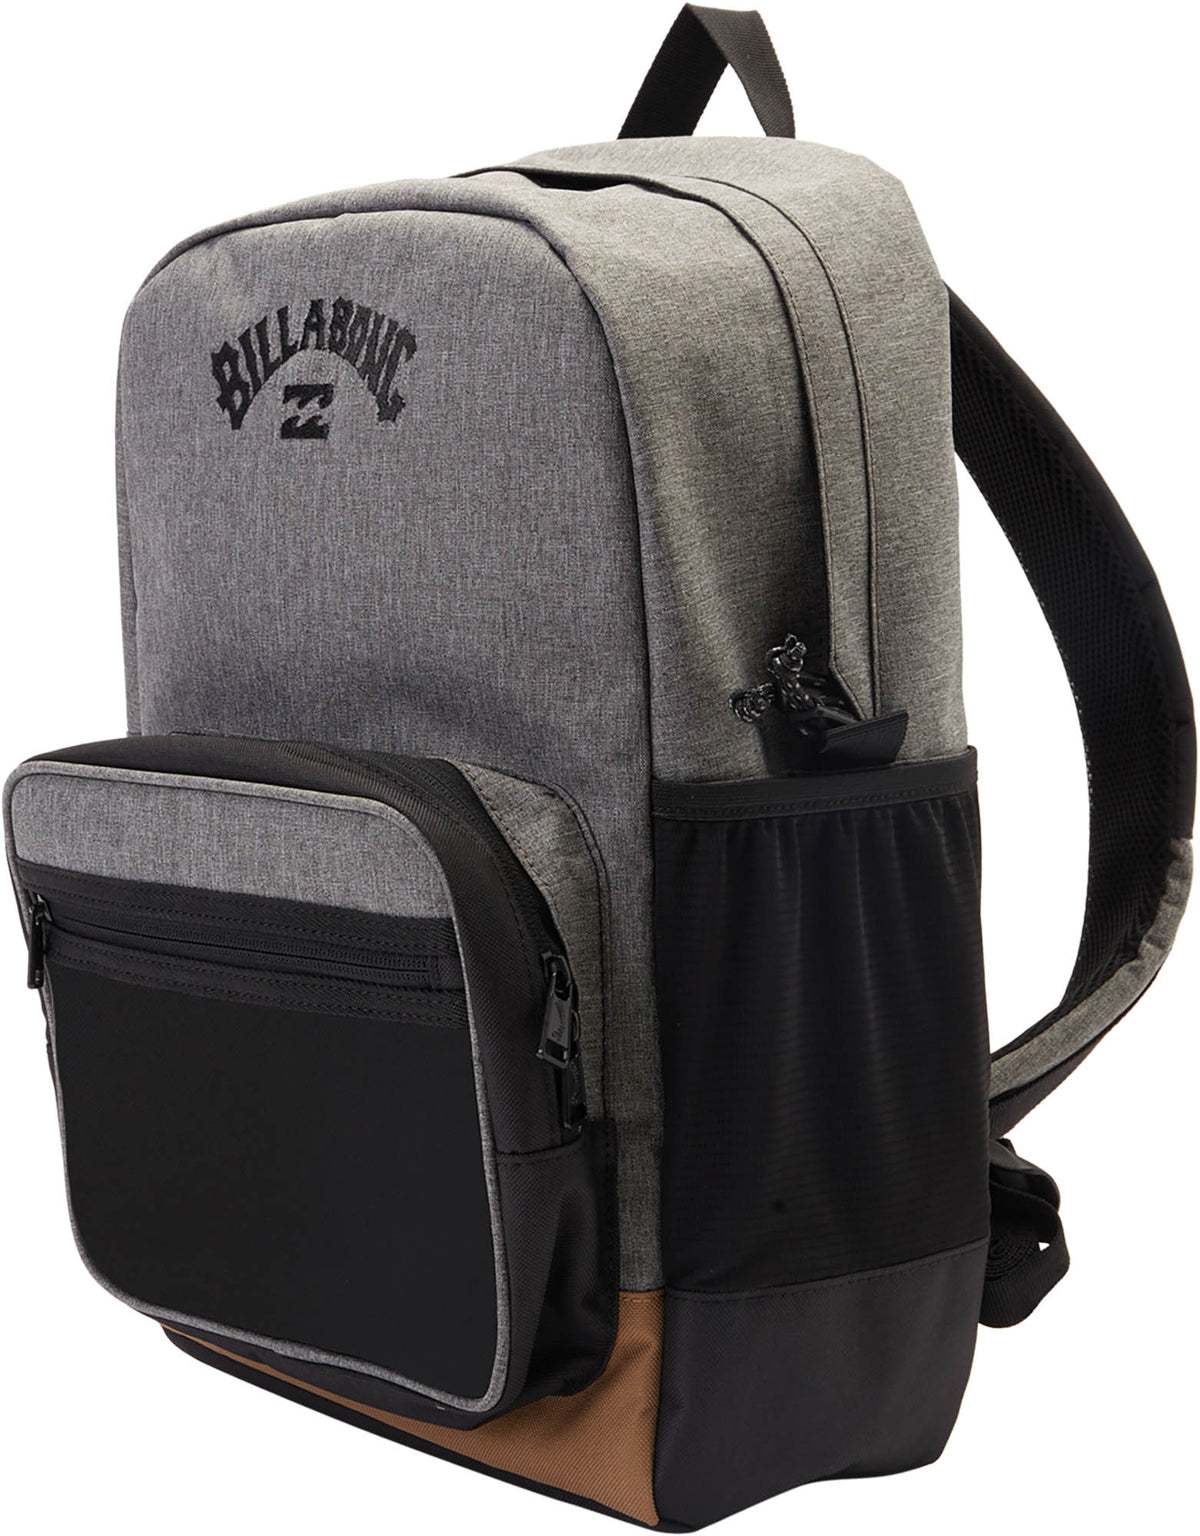 Billabong All Day Plus 22L Backpack - Grey Heather